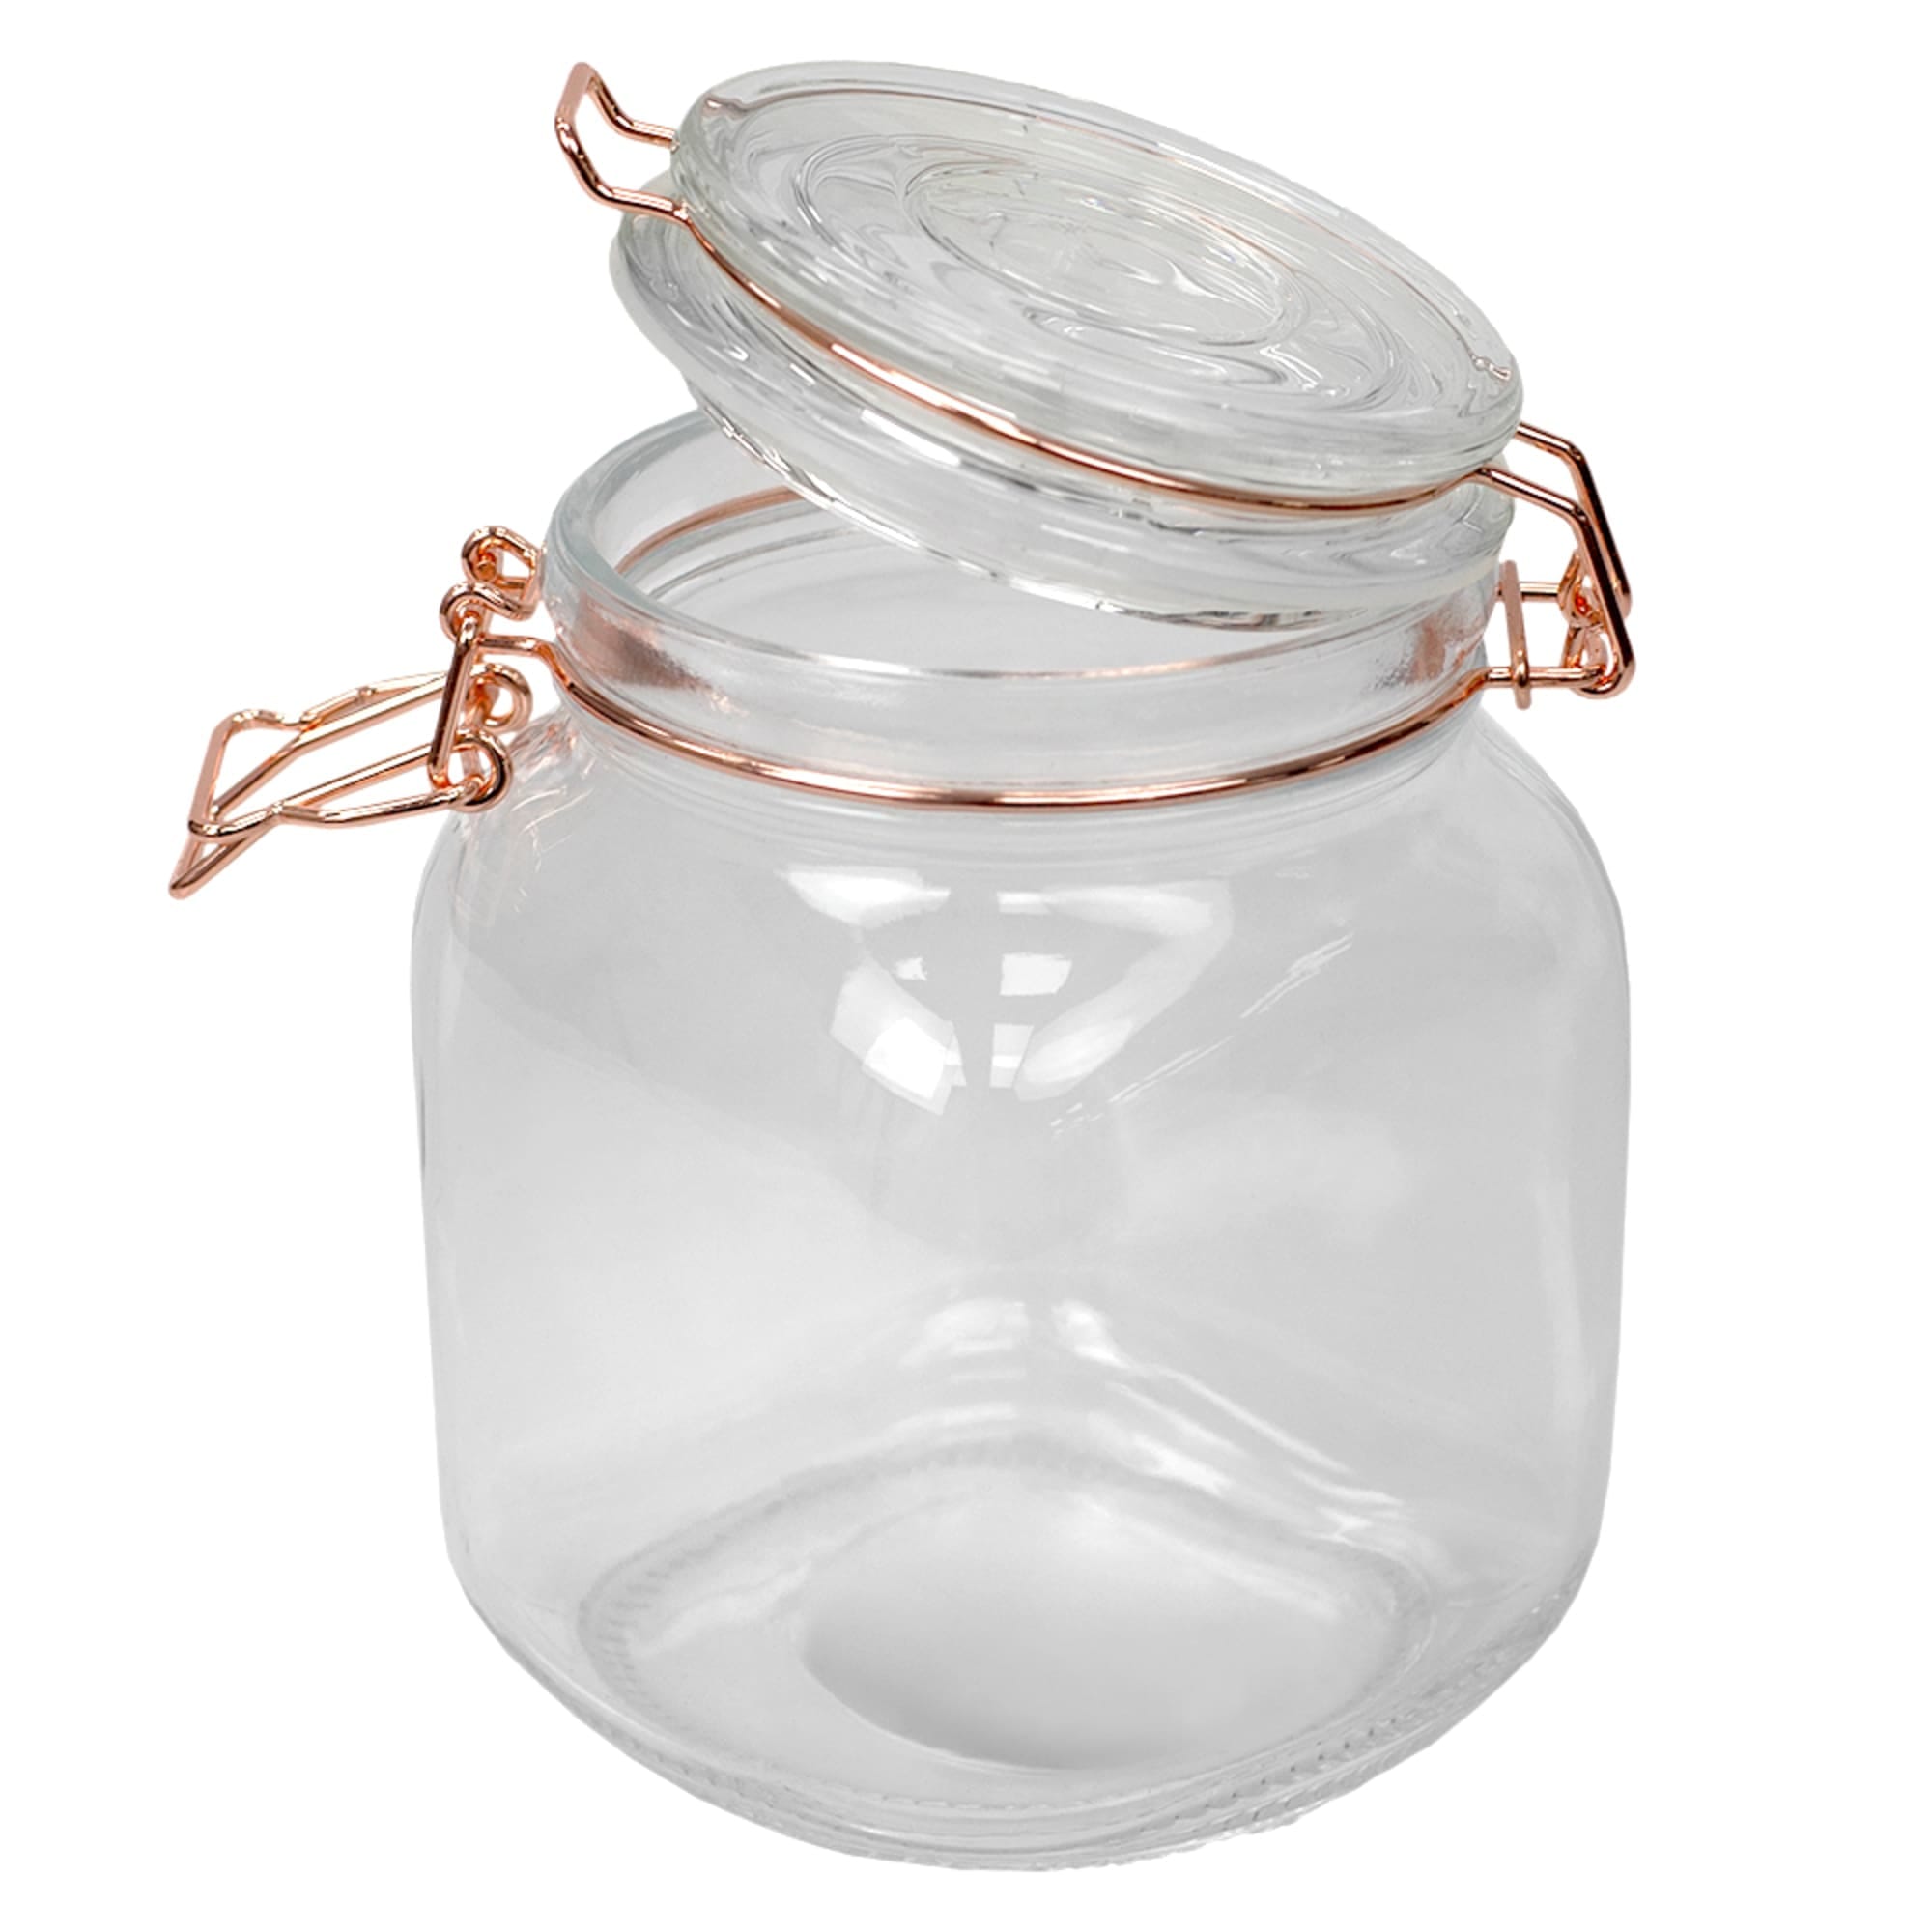 Home Basics Medium Glass Pickling Jar with Rose Gold Clamp $3 EACH, CASE PACK OF 12